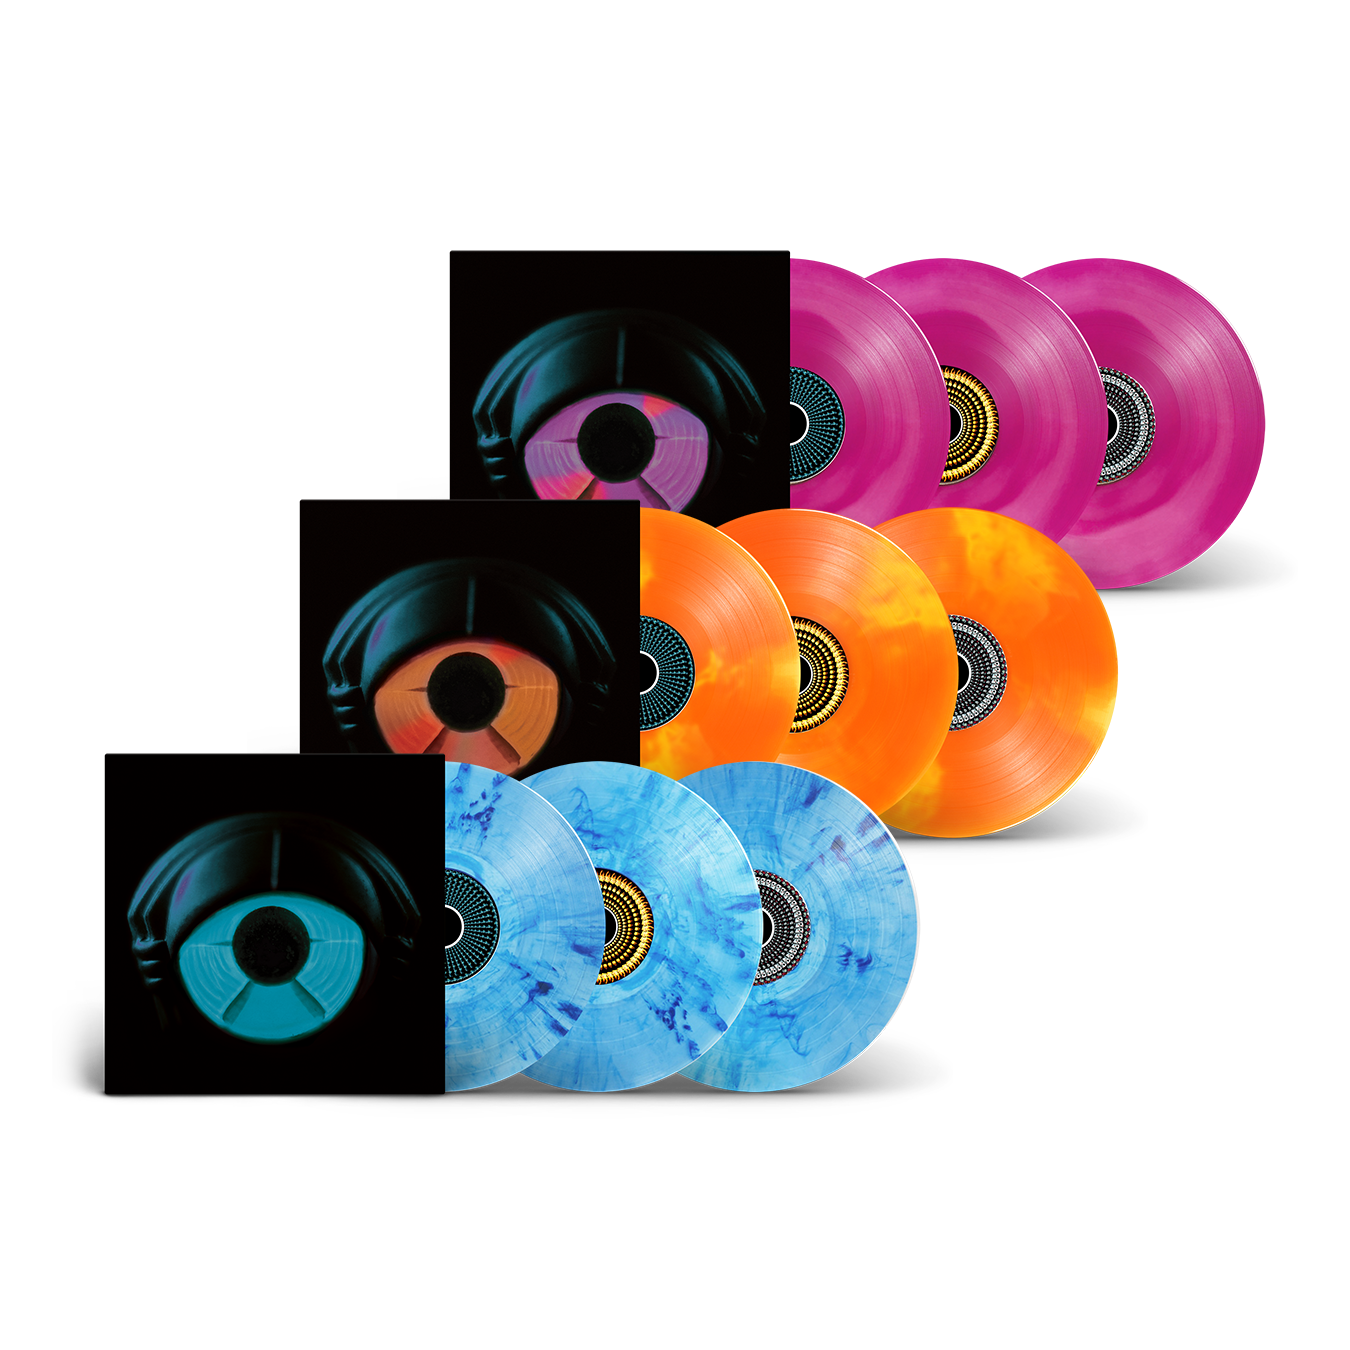 Circuital (Deluxe Edition): Limited Pink, Orange or Blue Lucky Dip Vinyl 3LP